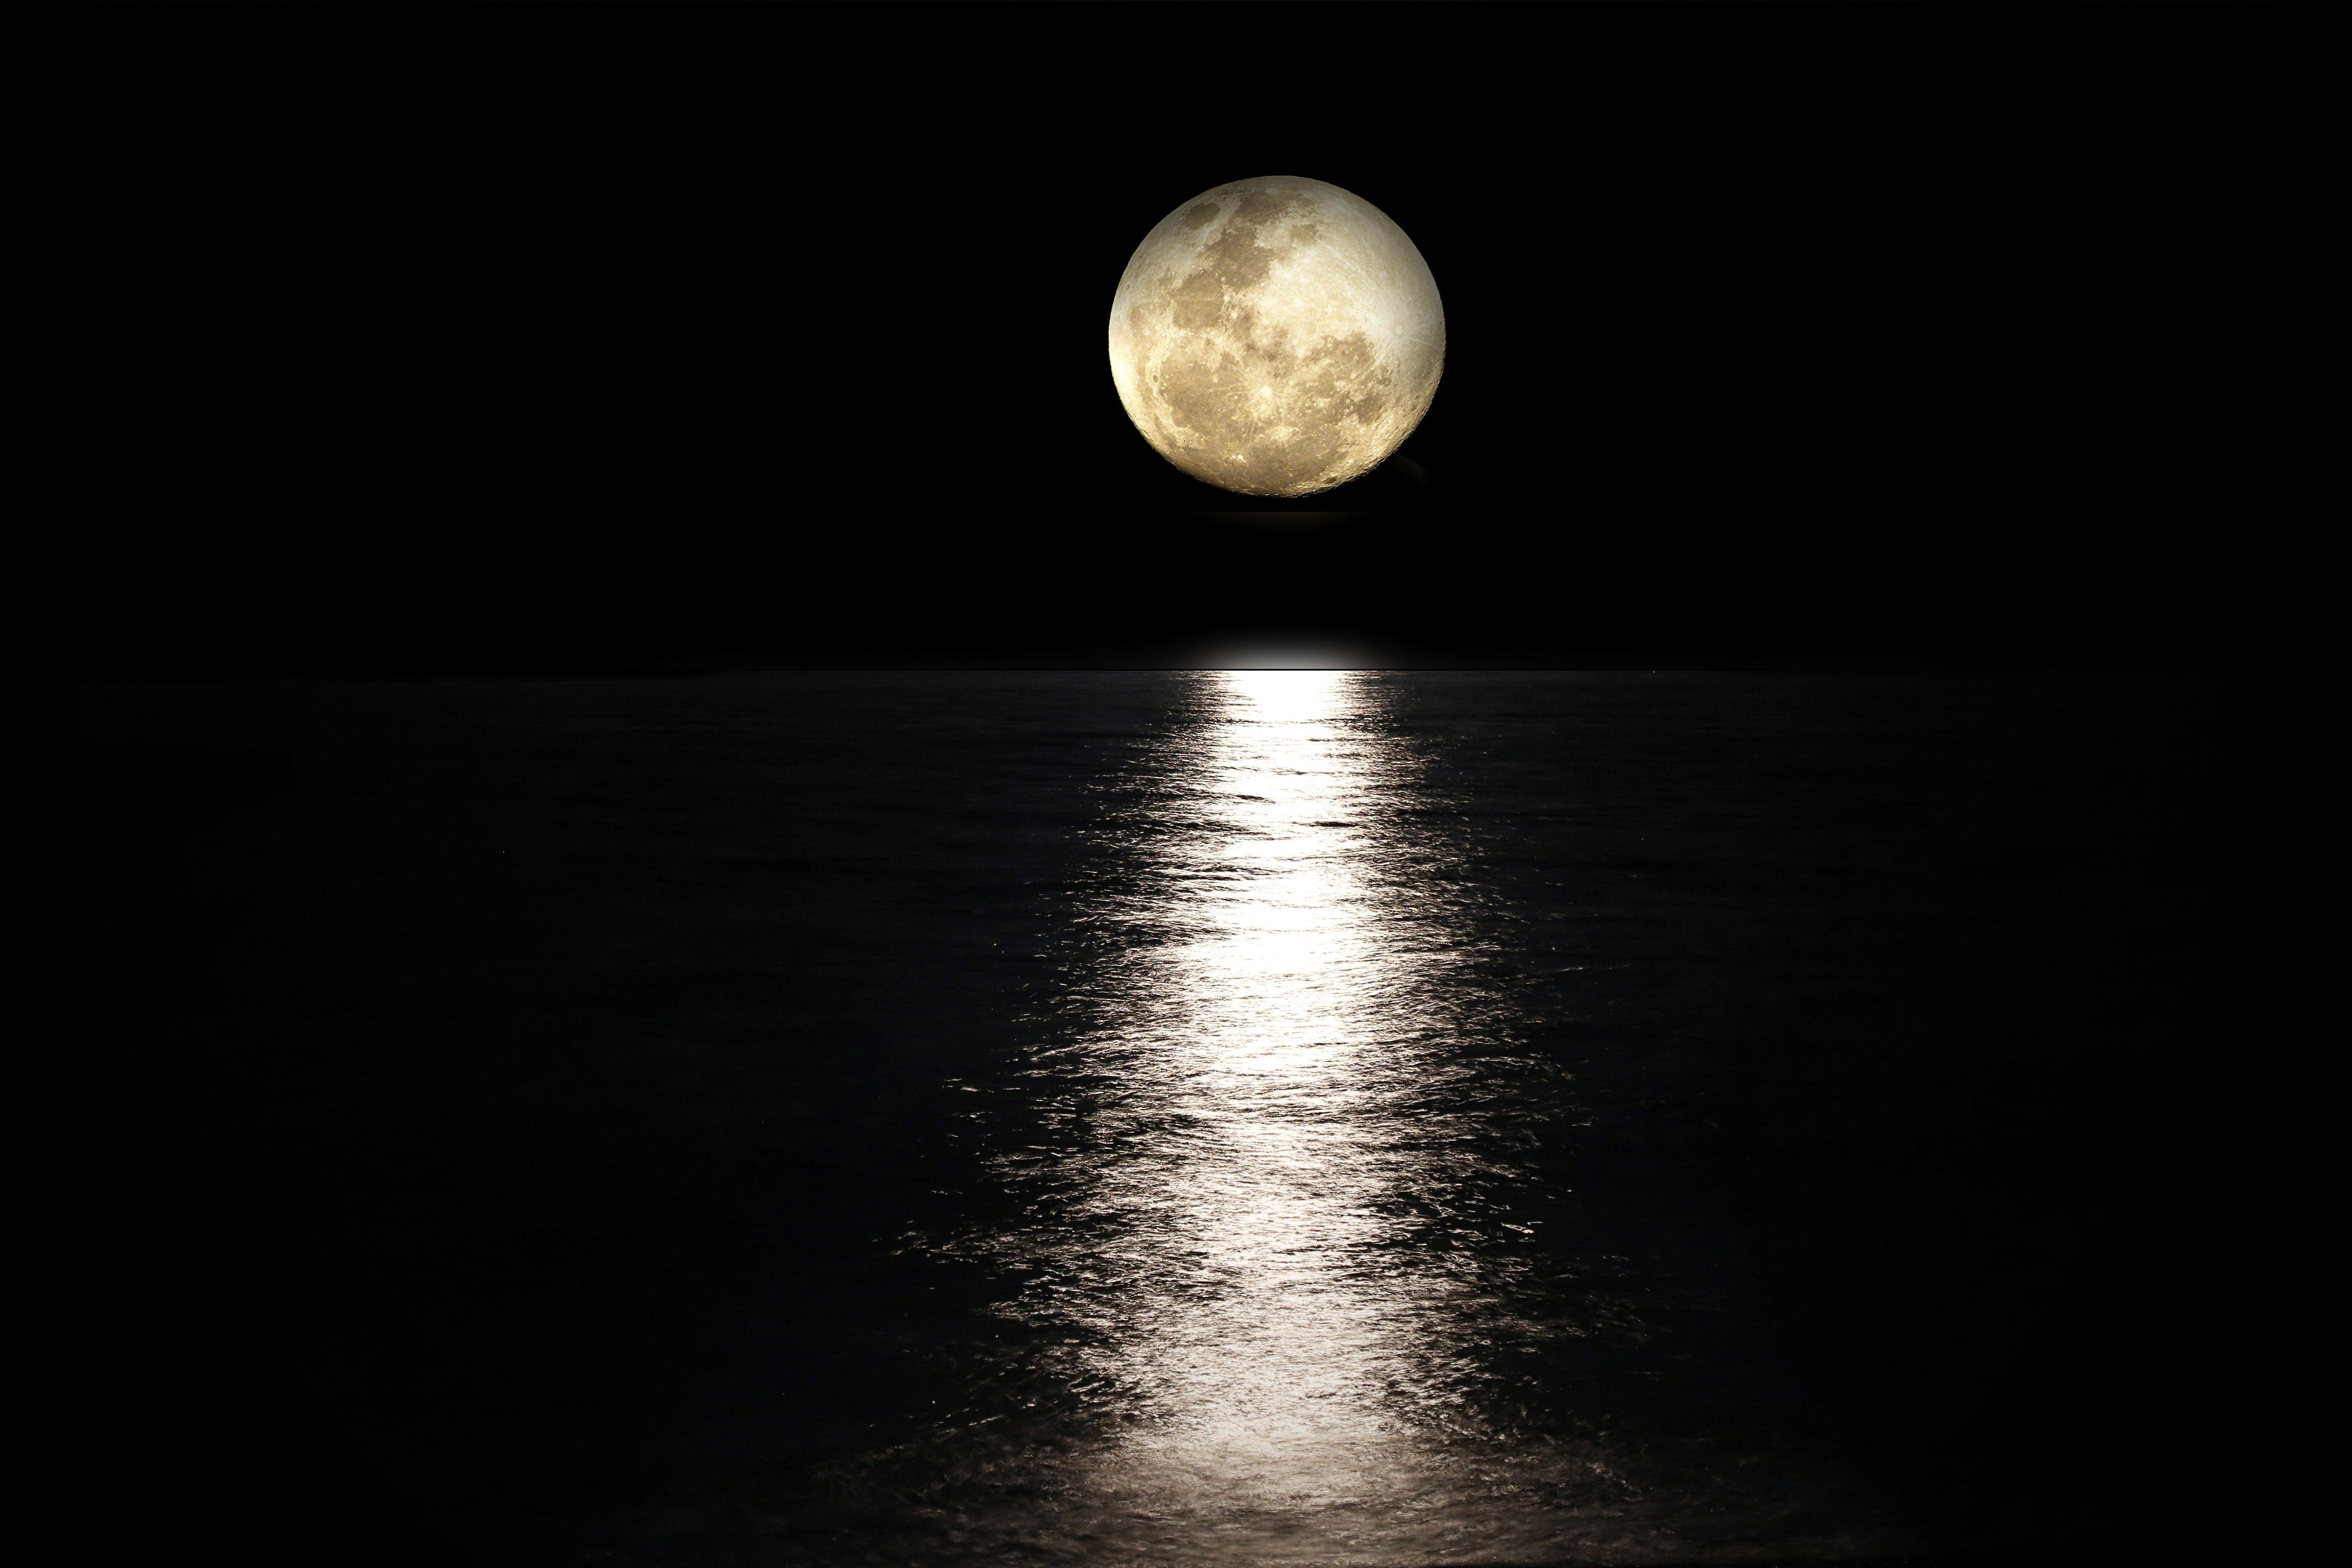 Dark Night With Moon Wallpapers - Top Free Dark Night With Moon